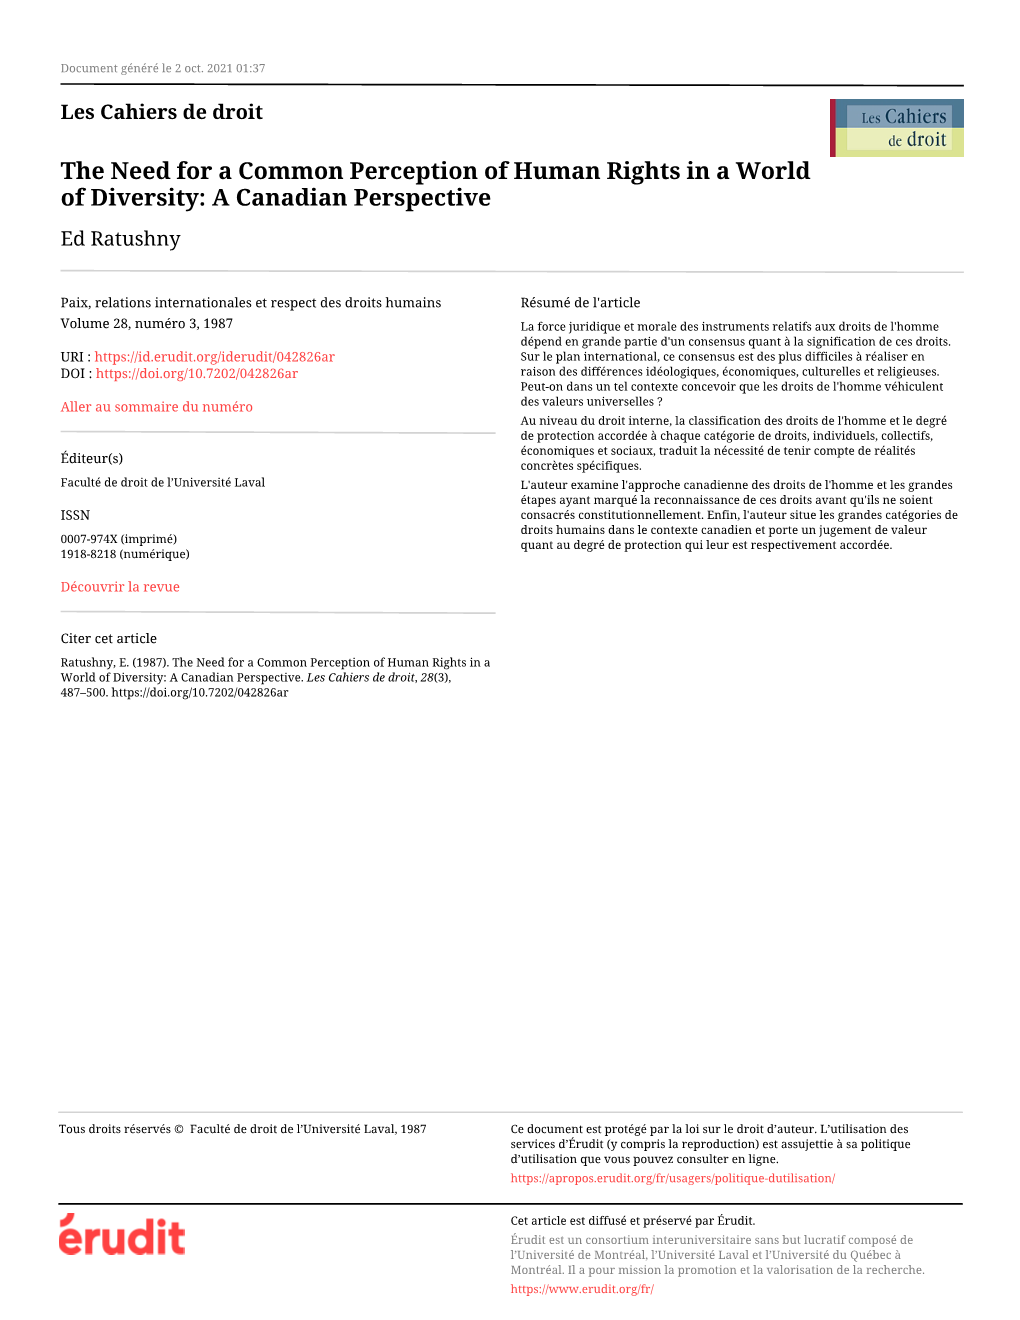 The Need for a Common Perception of Human Rights in a World of Diversity: a Canadian Perspective Ed Ratushny